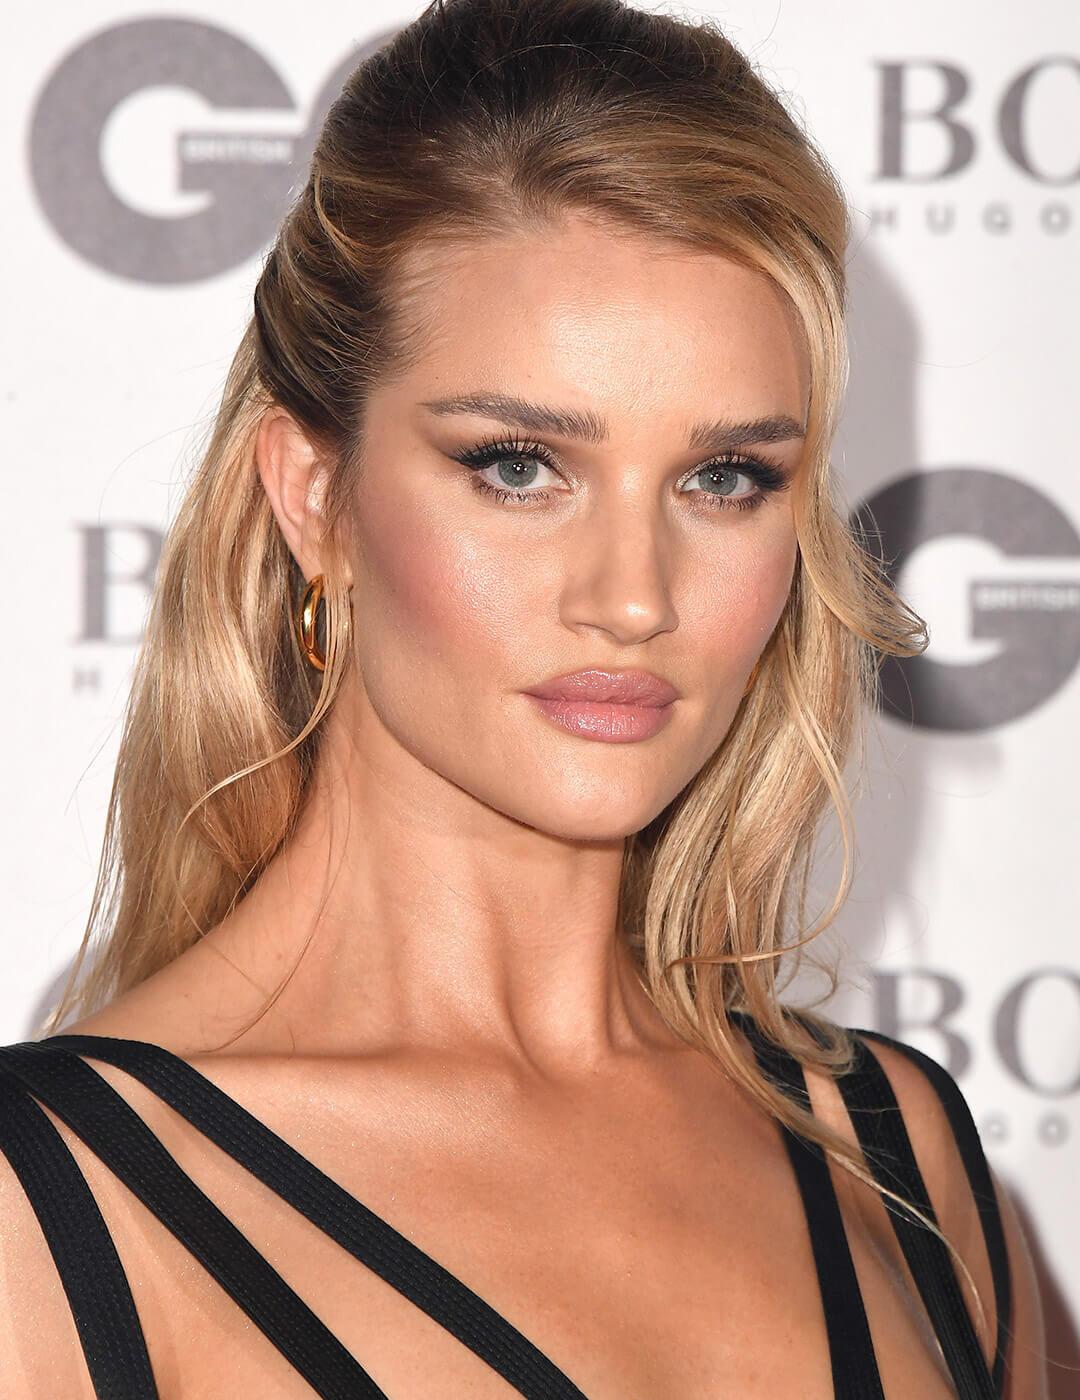 A photo of Rosie Huntington Whiteley with a '90s glamour look